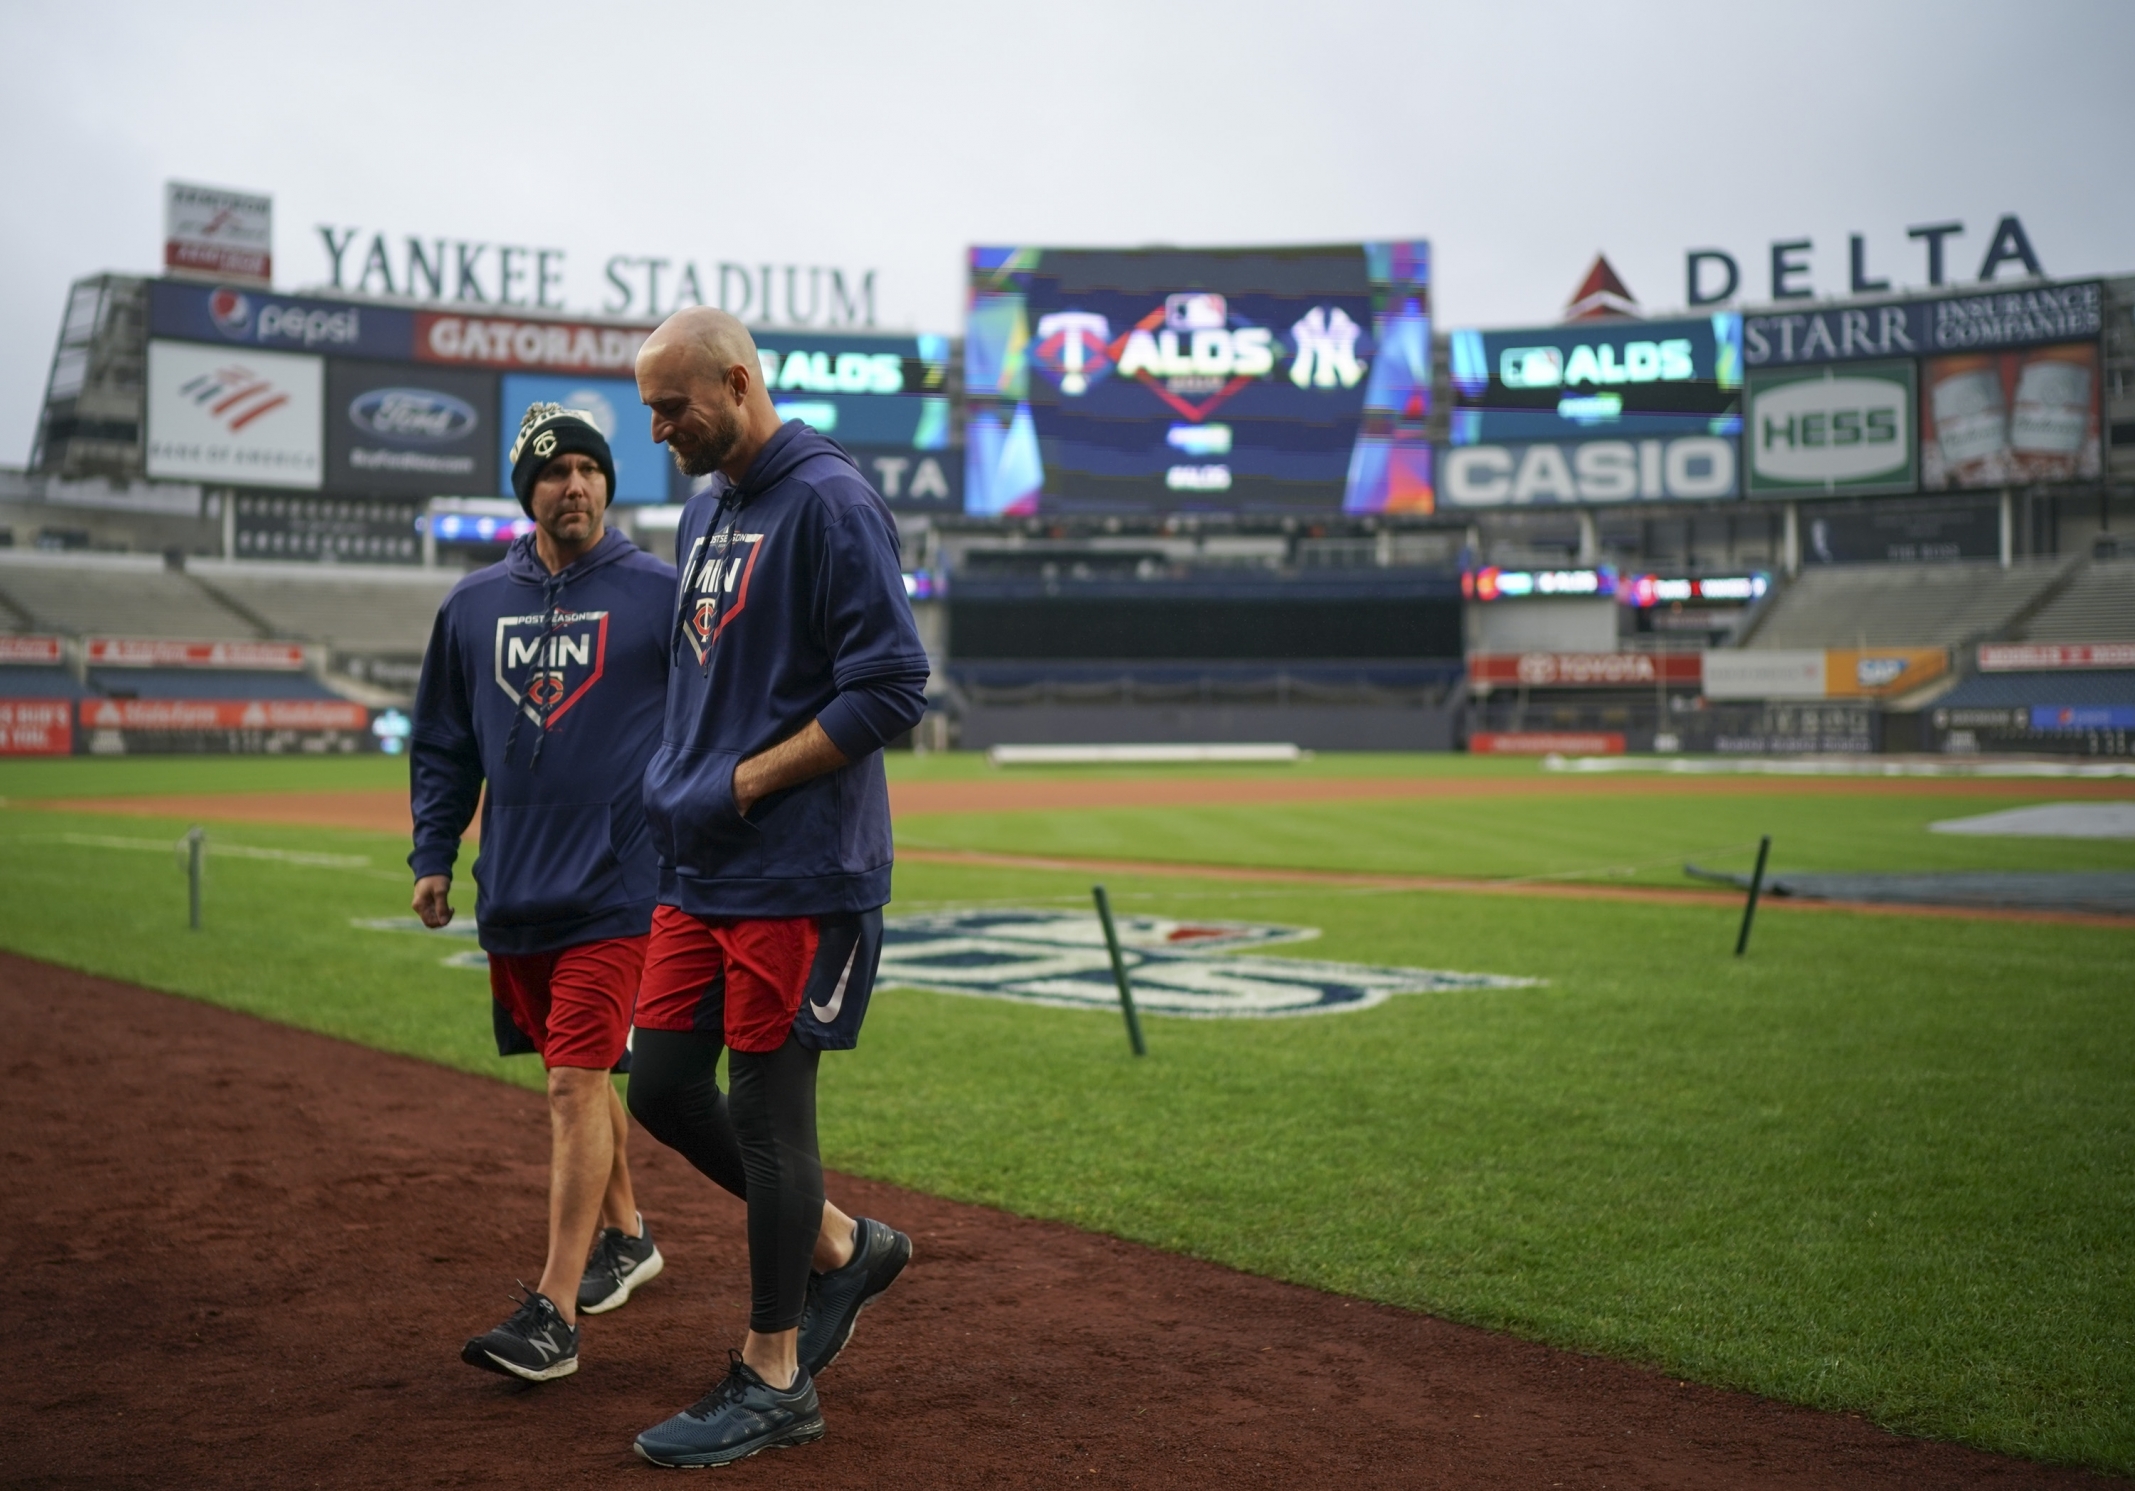 Baldelli, right, walked off the field at Yankee Stadium after watching a few players work out Thursday.